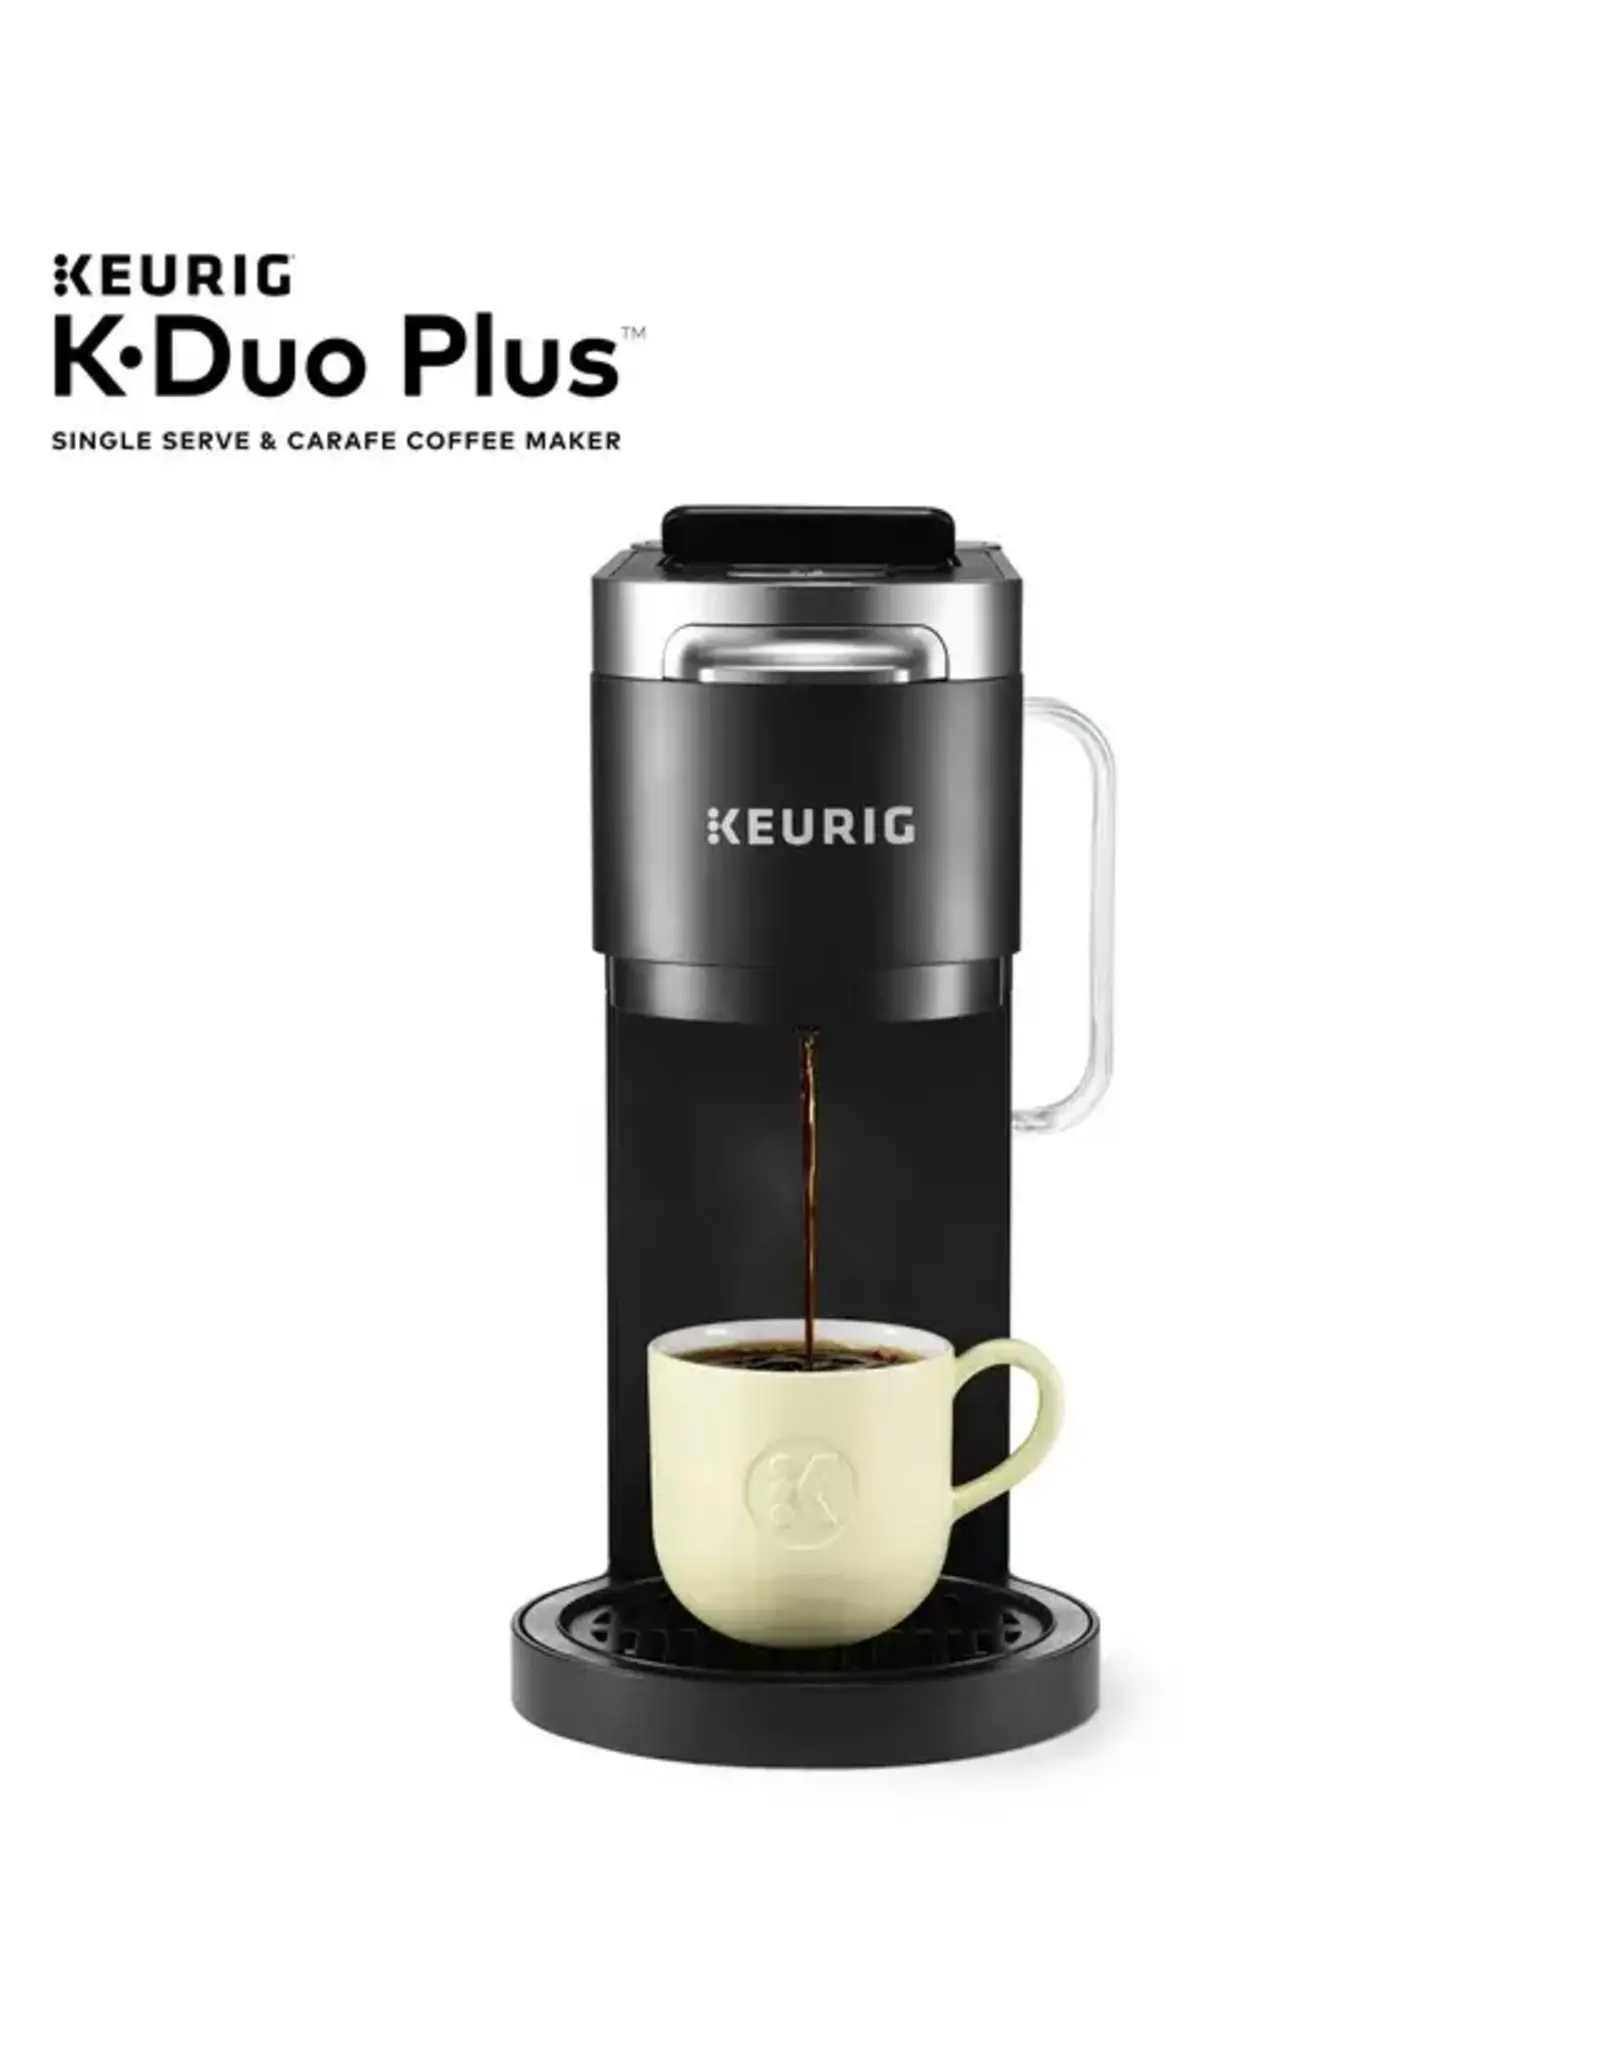 Best Keurig deal: Save over 40% on the K-Duo, a drip and K-Cup brewer